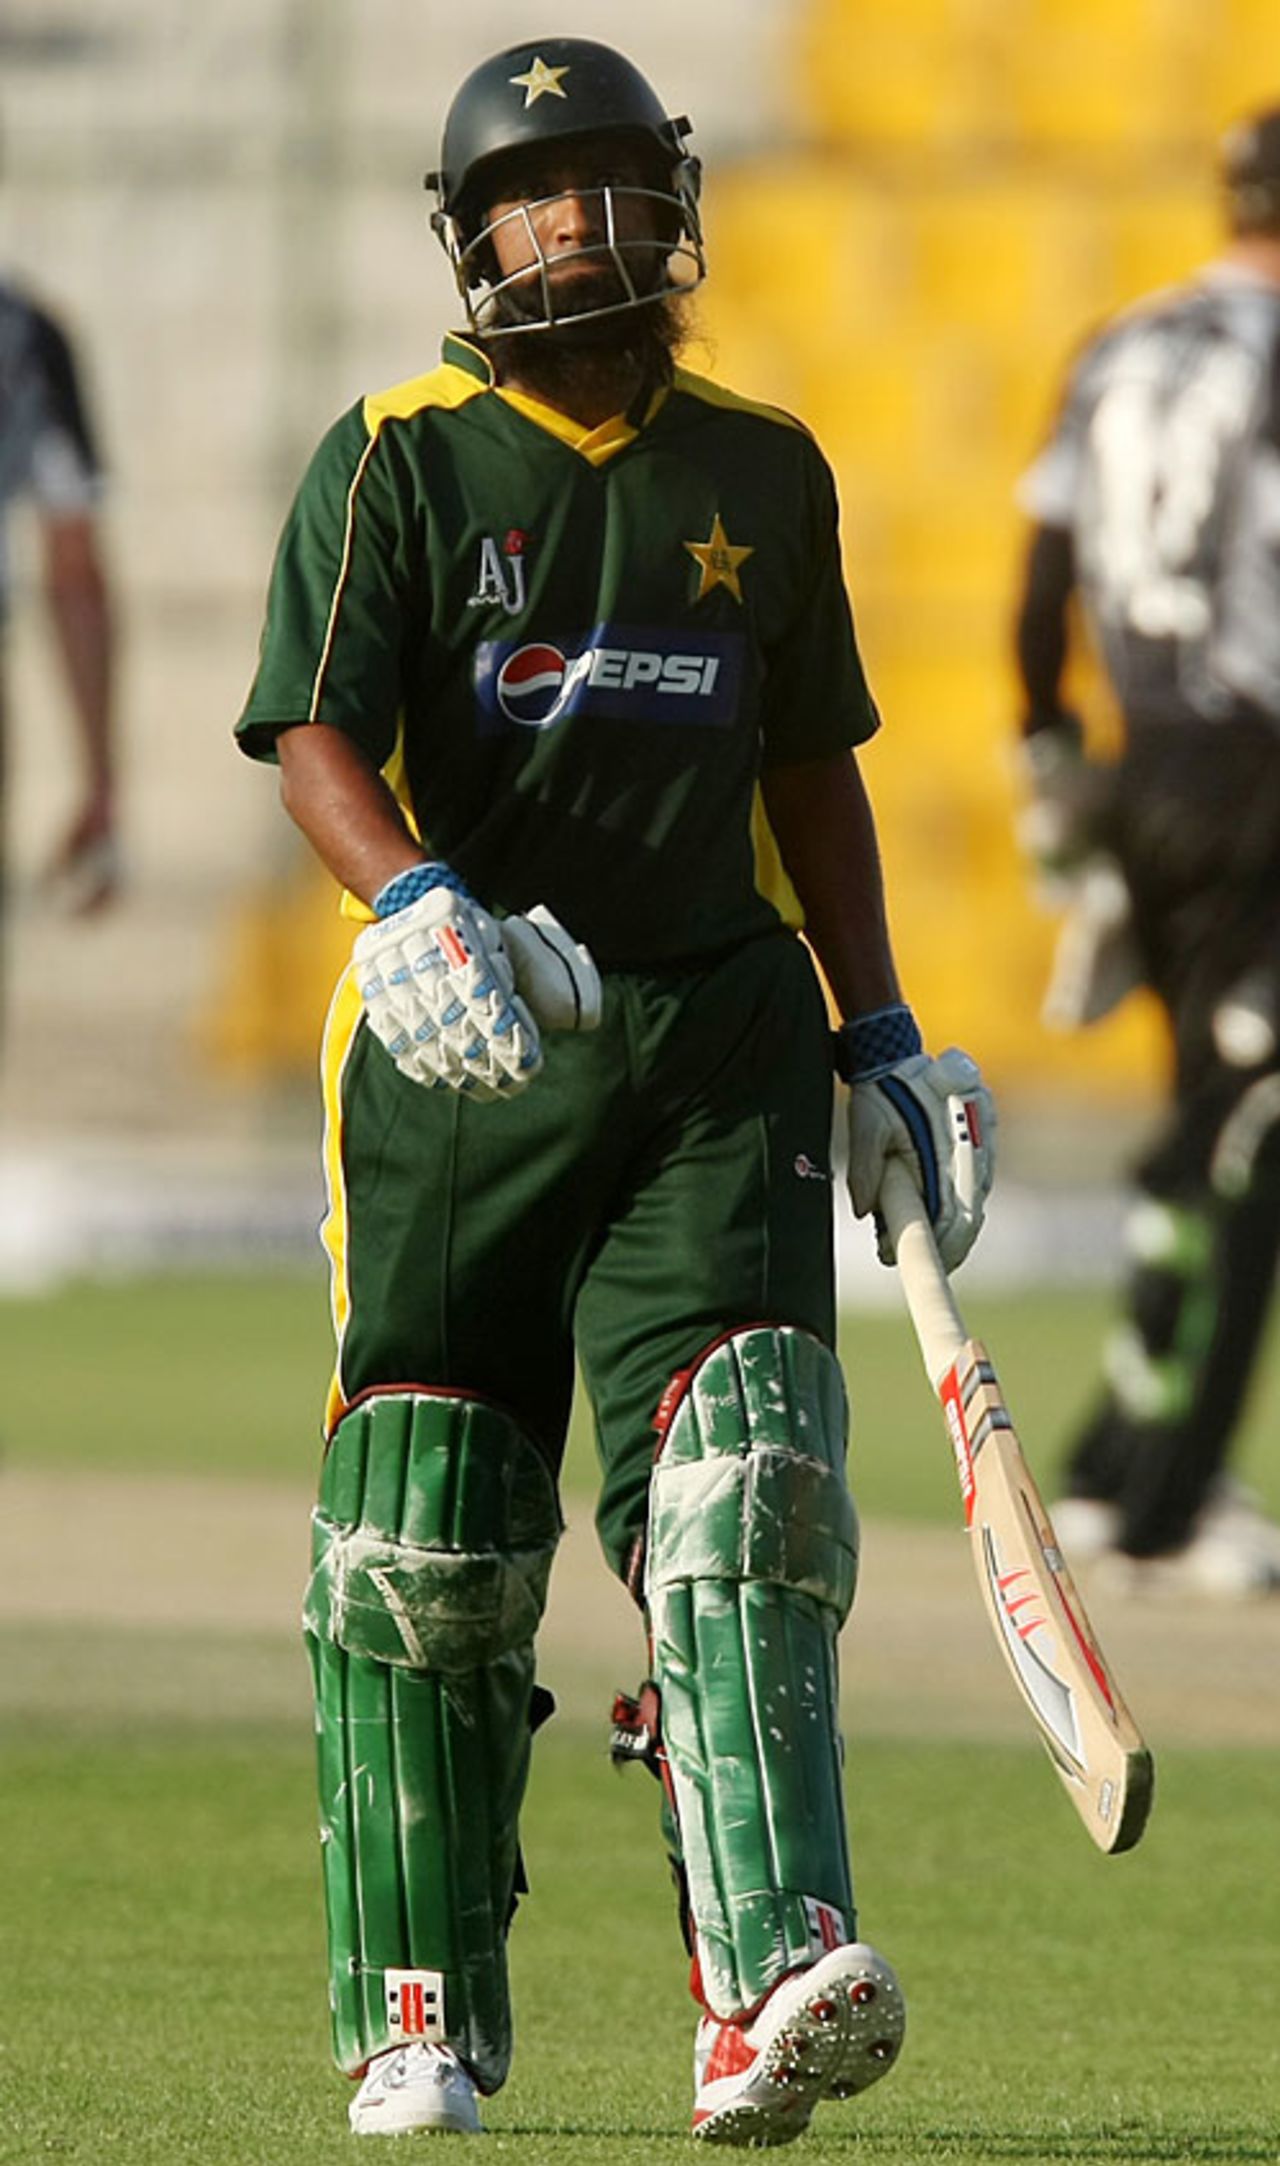 Mohammad Yousuf heads back after being run out, Pakistan v New Zealand, 1st ODI, Abu Dhabi, November 3, 2009